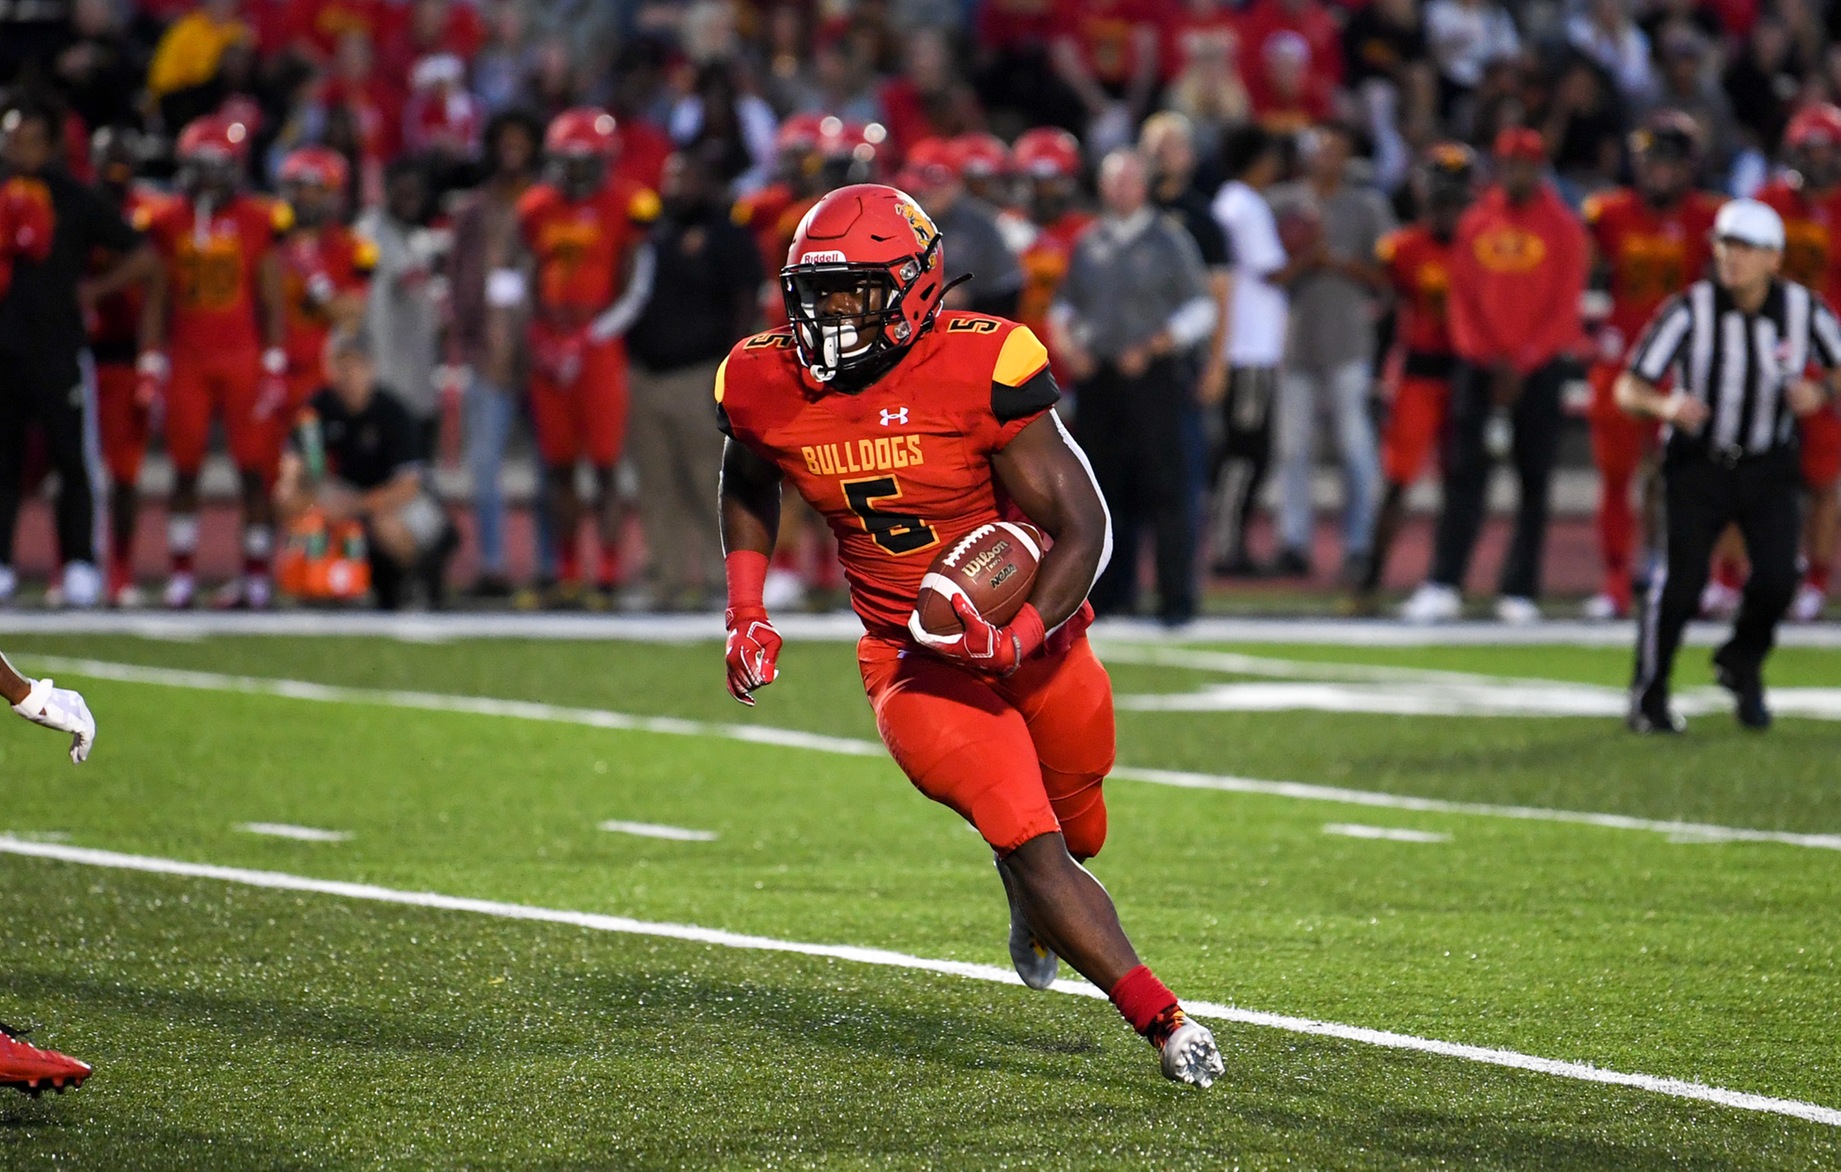 Ferris State Rushes Past Northern Michigan In Front Of Large Homecoming Crowd